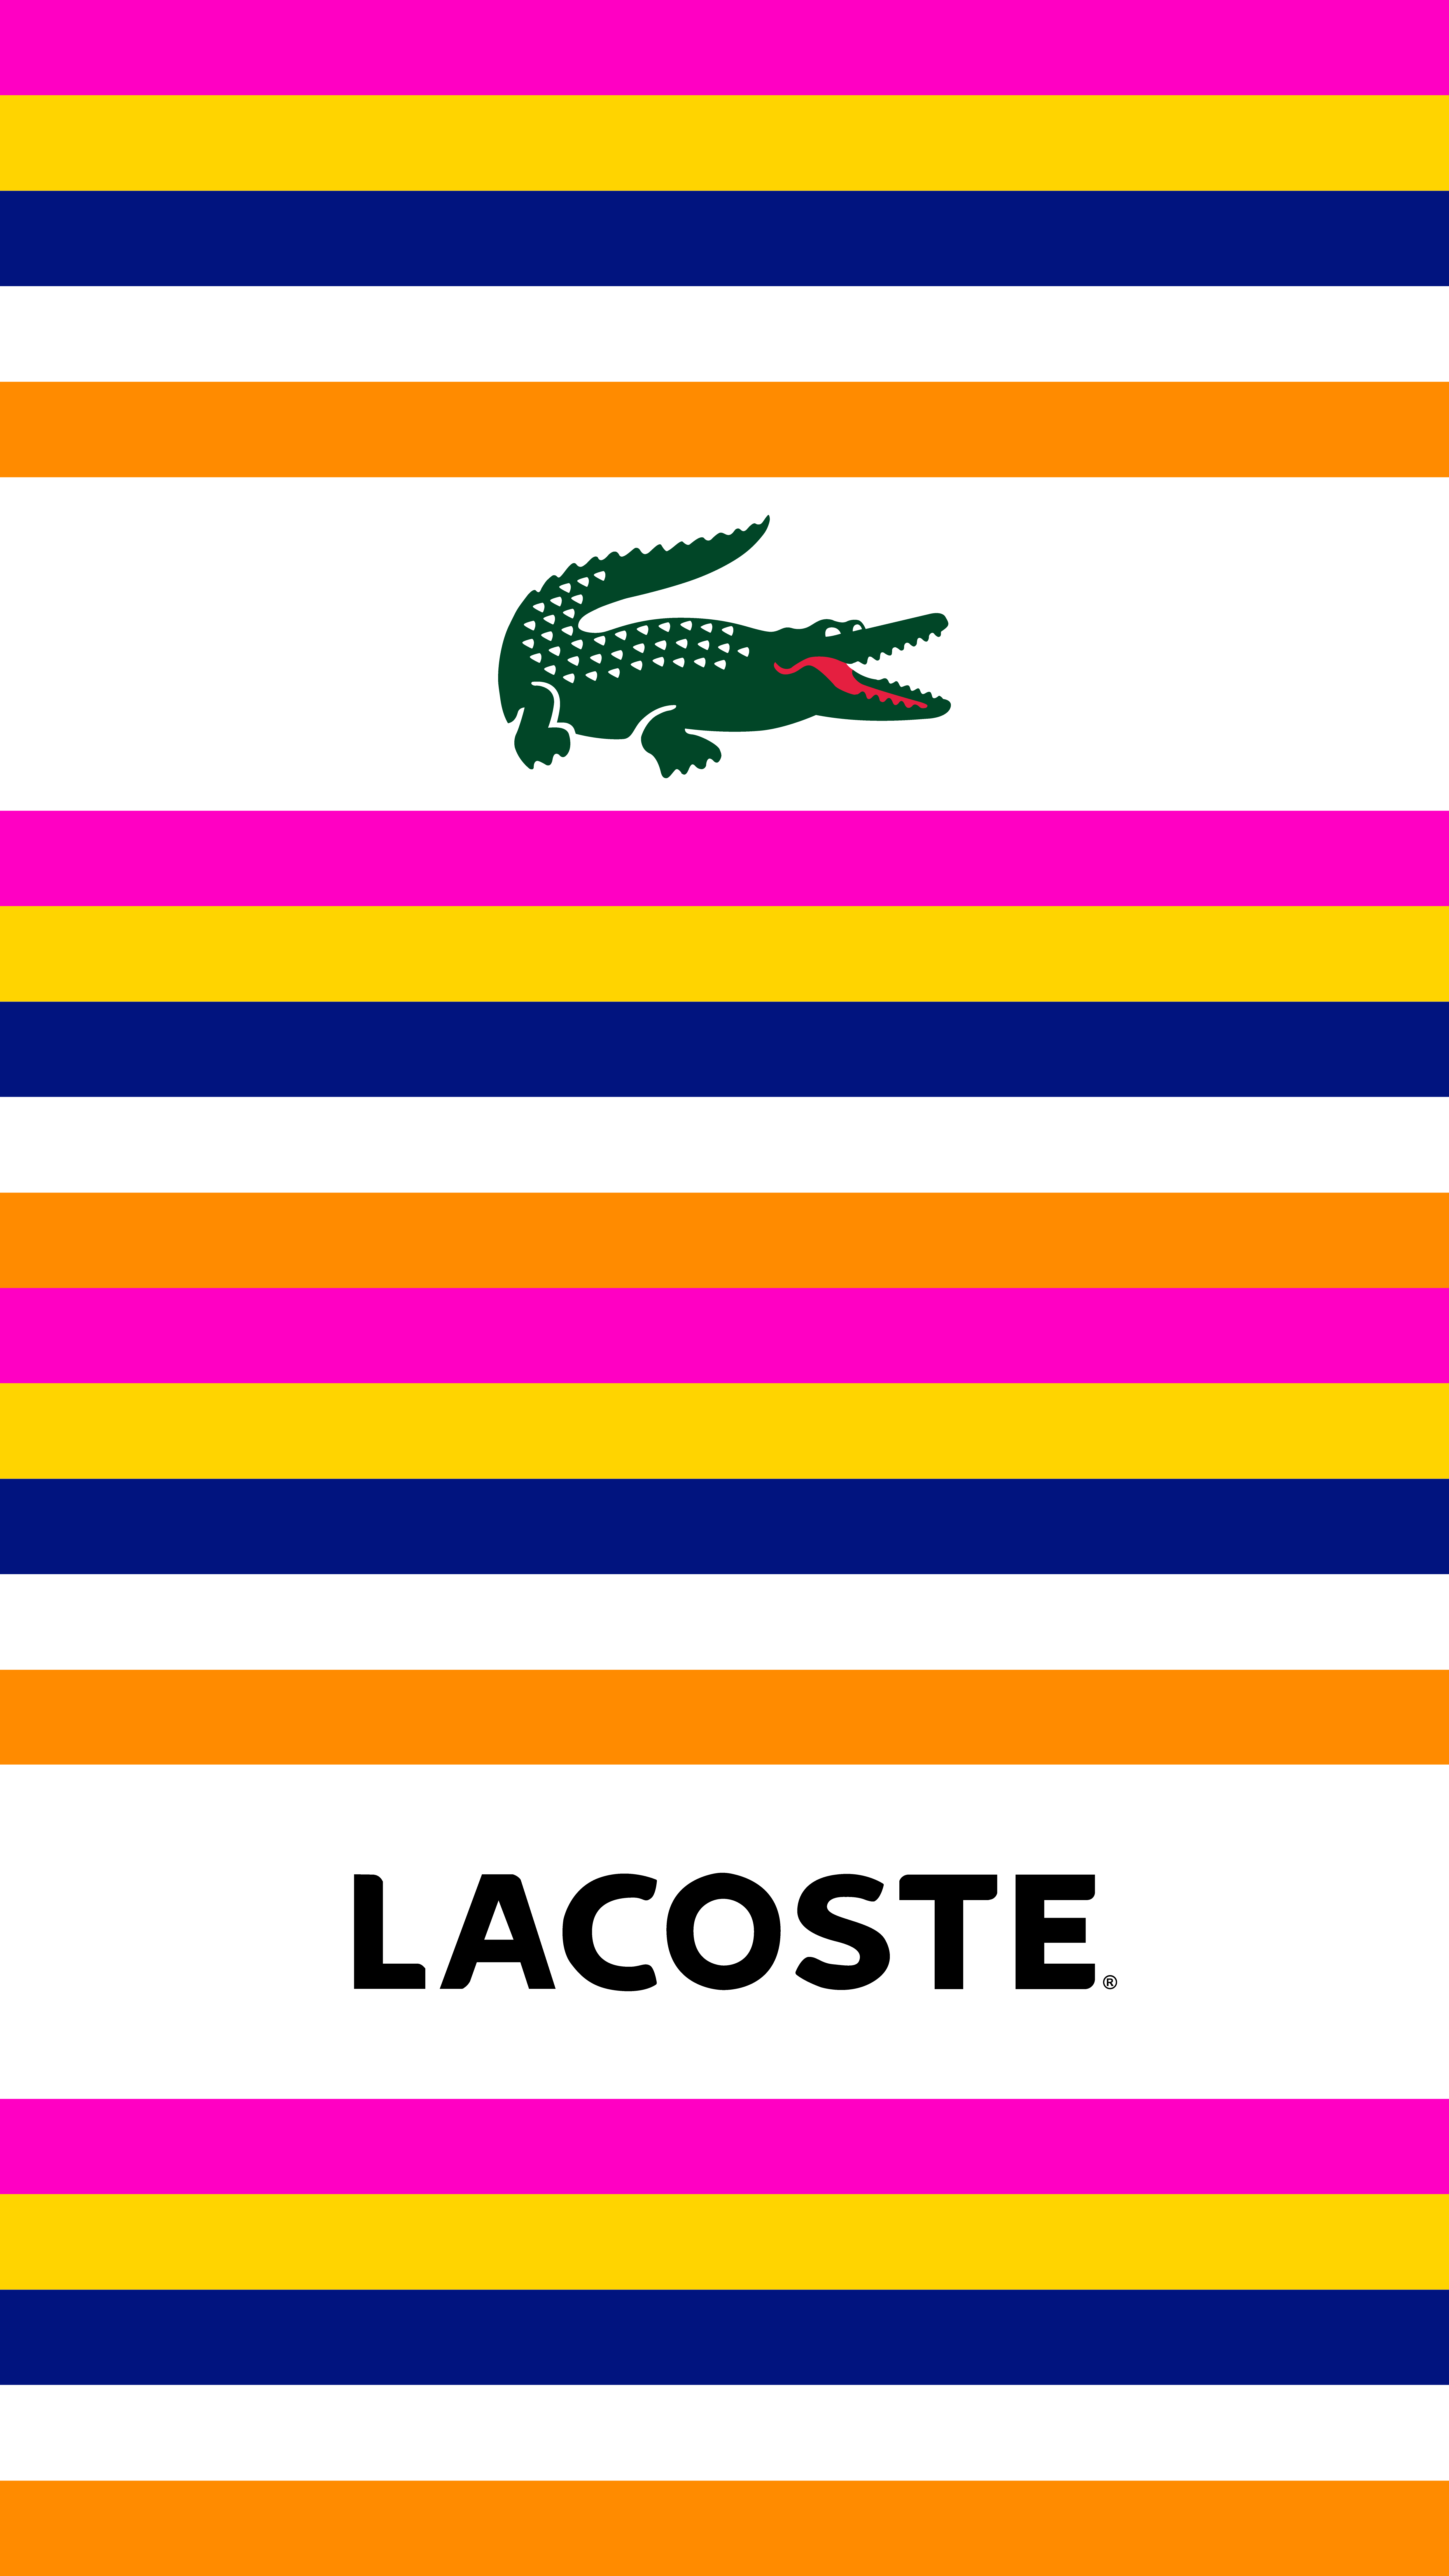 Lacoste #Color #Modern #Lala #Wallpaper #FullHD first